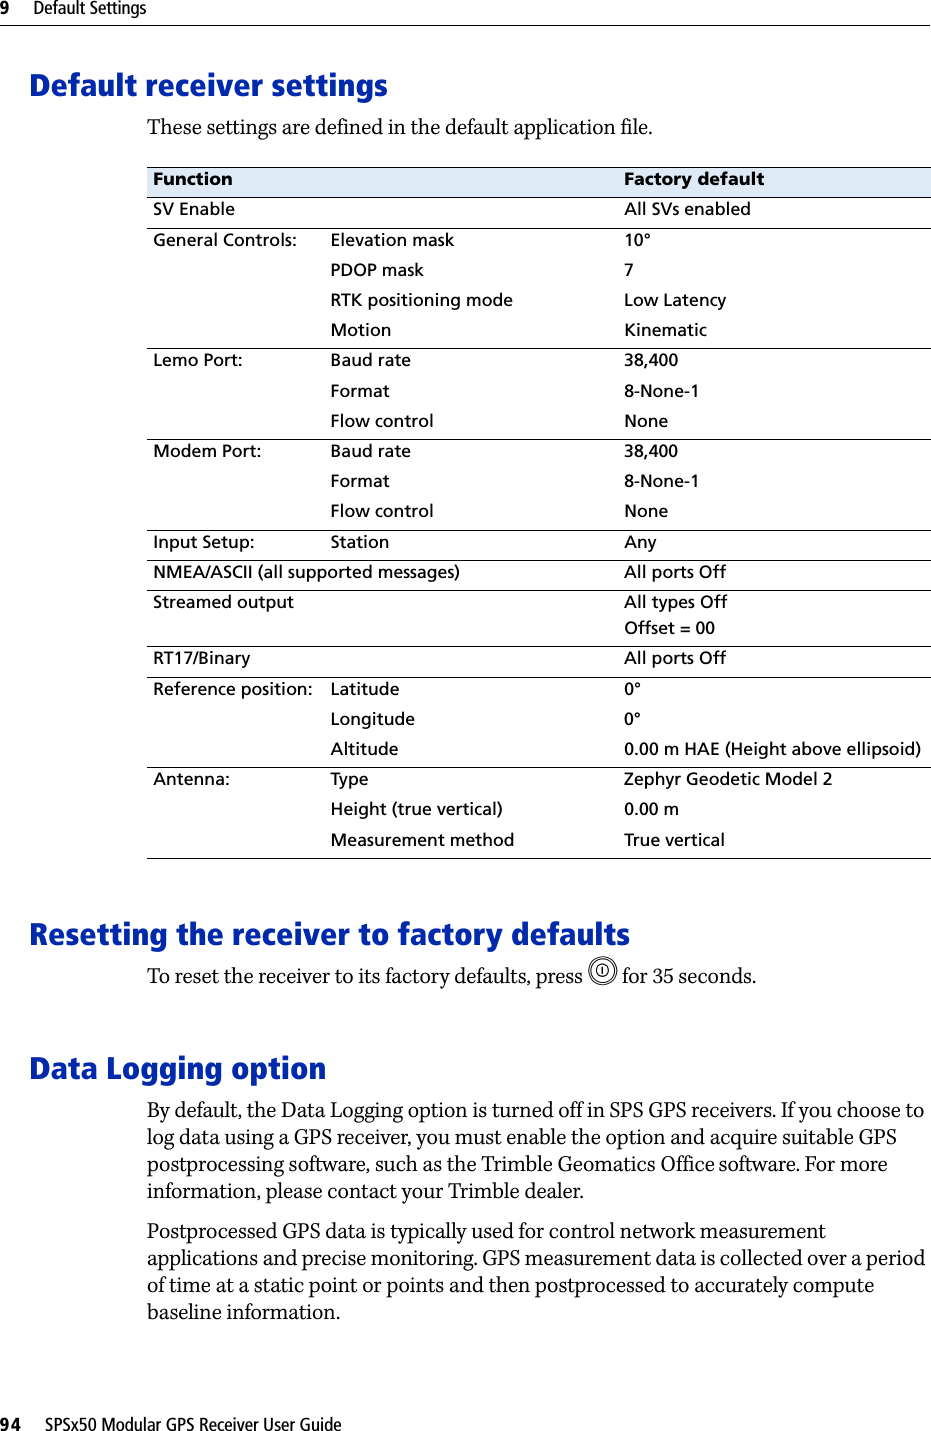 9     Default Settings94     SPSx50 Modular GPS Receiver User GuideDefault receiver settingsThese settings are defined in the default application file. Resetting the receiver to factory defaultsTo reset the receiver to its factory defaults, press E     for 35 seconds.Data Logging optionBy default, the Data Logging option is turned off in SPS GPS receivers. If you choose to log data using a GPS receiver, you must enable the option and acquire suitable GPS postprocessing software, such as the Trimble Geomatics Office software. For more information, please contact your Trimble dealer.Postprocessed GPS data is typically used for control network measurement applications and precise monitoring. GPS measurement data is collected over a period of time at a static point or points and then postprocessed to accurately compute baseline information. Function Factory defaultSV Enable All SVs enabledGeneral Controls: Elevation mask 10°PDOP mask 7RTK positioning mode Low LatencyMotion KinematicLemo Port: Baud rate 38,400Format 8-None-1Flow control NoneModem Port: Baud rate 38,400Format 8-None-1Flow control NoneInput Setup: Station AnyNMEA/ASCII (all supported messages) All ports OffStreamed output All types OffOffset = 00RT17/Binary All ports OffReference position: Latitude 0°Longitude 0°Altitude 0.00 m HAE (Height above ellipsoid)Antenna: Type Zephyr Geodetic Model 2Height (true vertical) 0.00 mMeasurement method True vertical